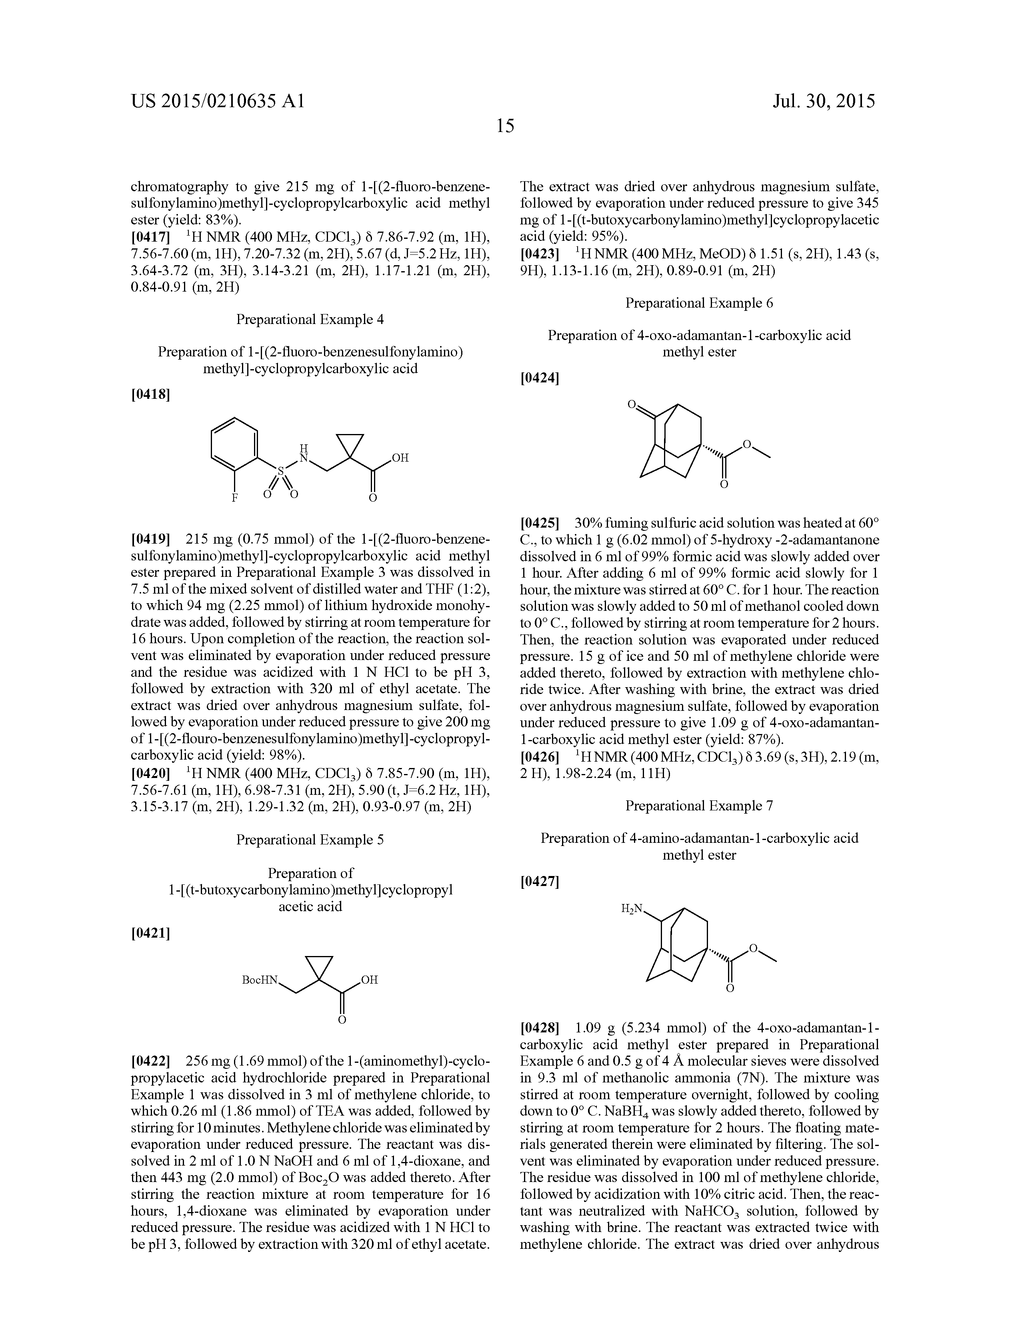 NOVEL COMPOUND HAVING ABILITY TO INHIBIT 11B-HSD1 ENZYME OR     PHARMACEUTICALLY ACCEPTABLE SALT THEREOF, METHOD FOR PRODUCING SAME, AND     PHARMACEUTICAL COMPOSITION CONTAINING SAME AS ACTIVE INGREDIENT - diagram, schematic, and image 16